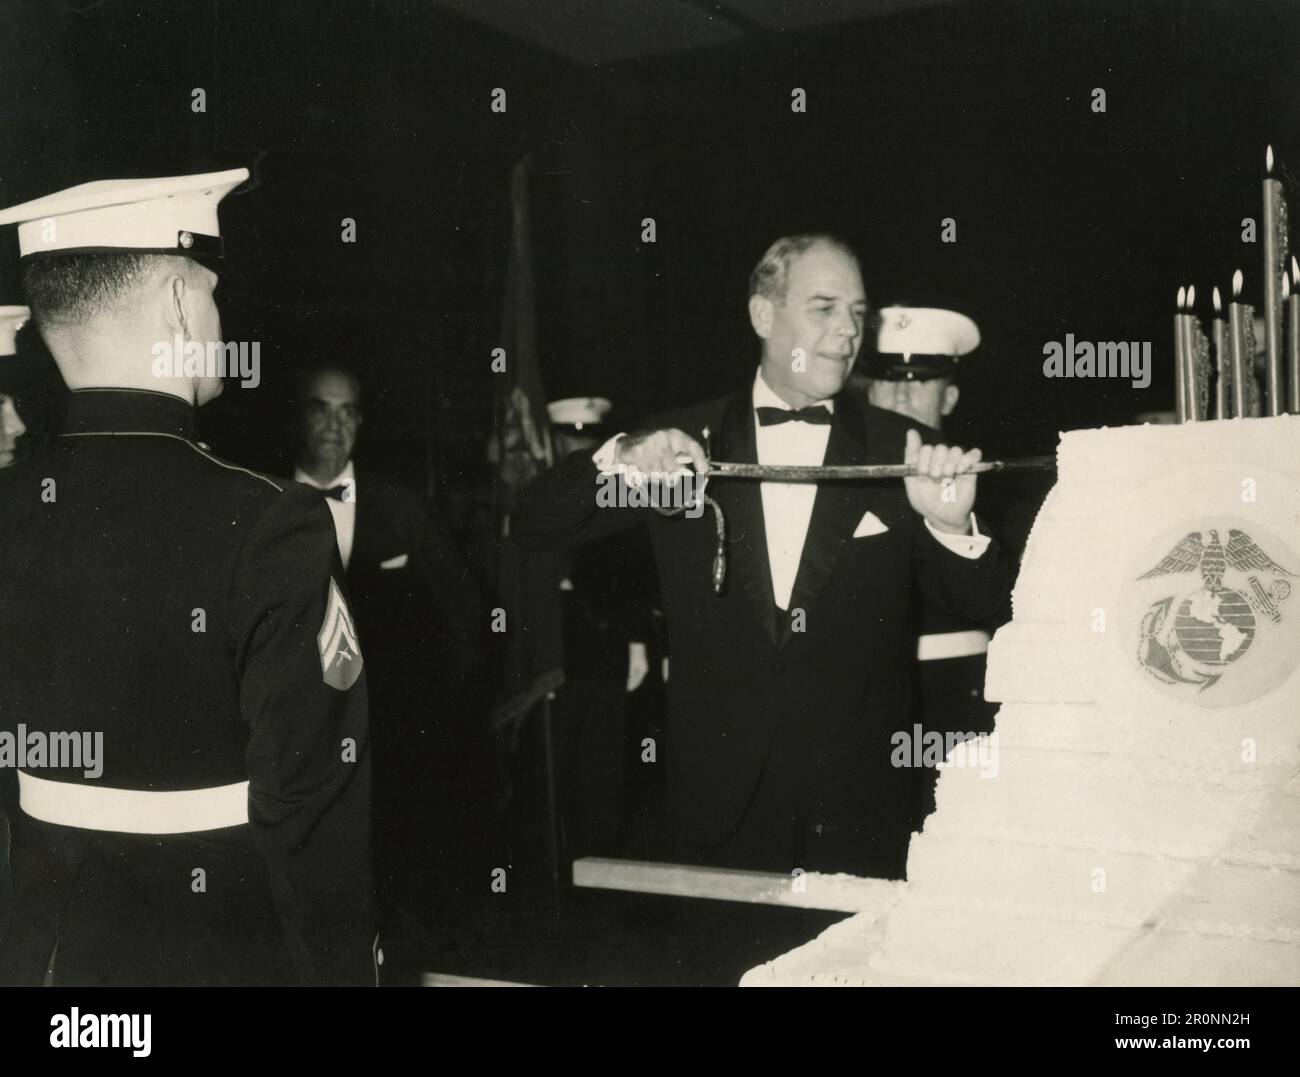 US Ambassador Frederick Reinhardt as the guest of honor cuts the traditional birthday cake celebrating the 190th birthday of the Marine Corps, 1965 Stock Photo